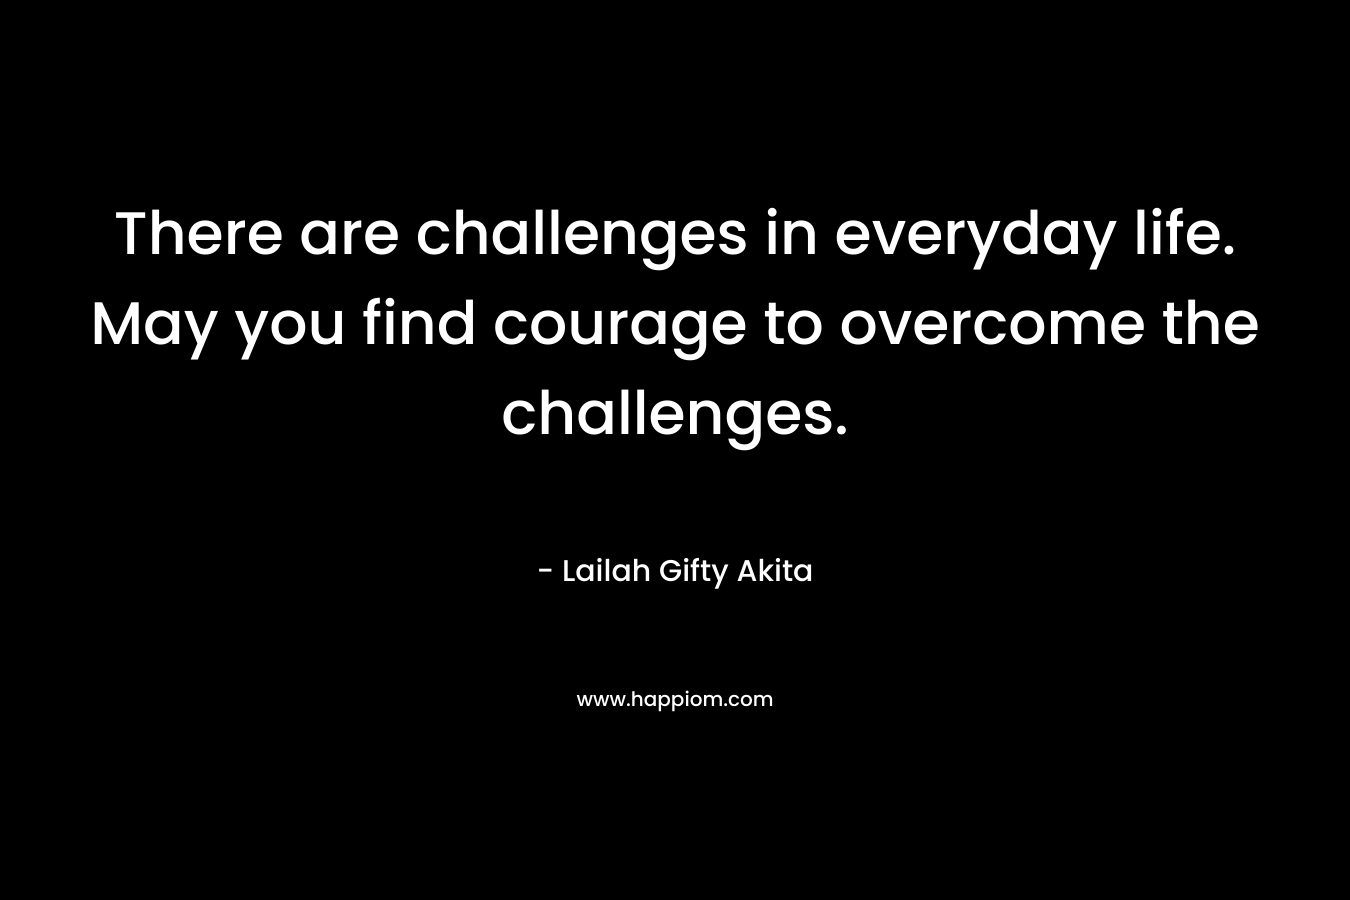 There are challenges in everyday life. May you find courage to overcome the challenges.